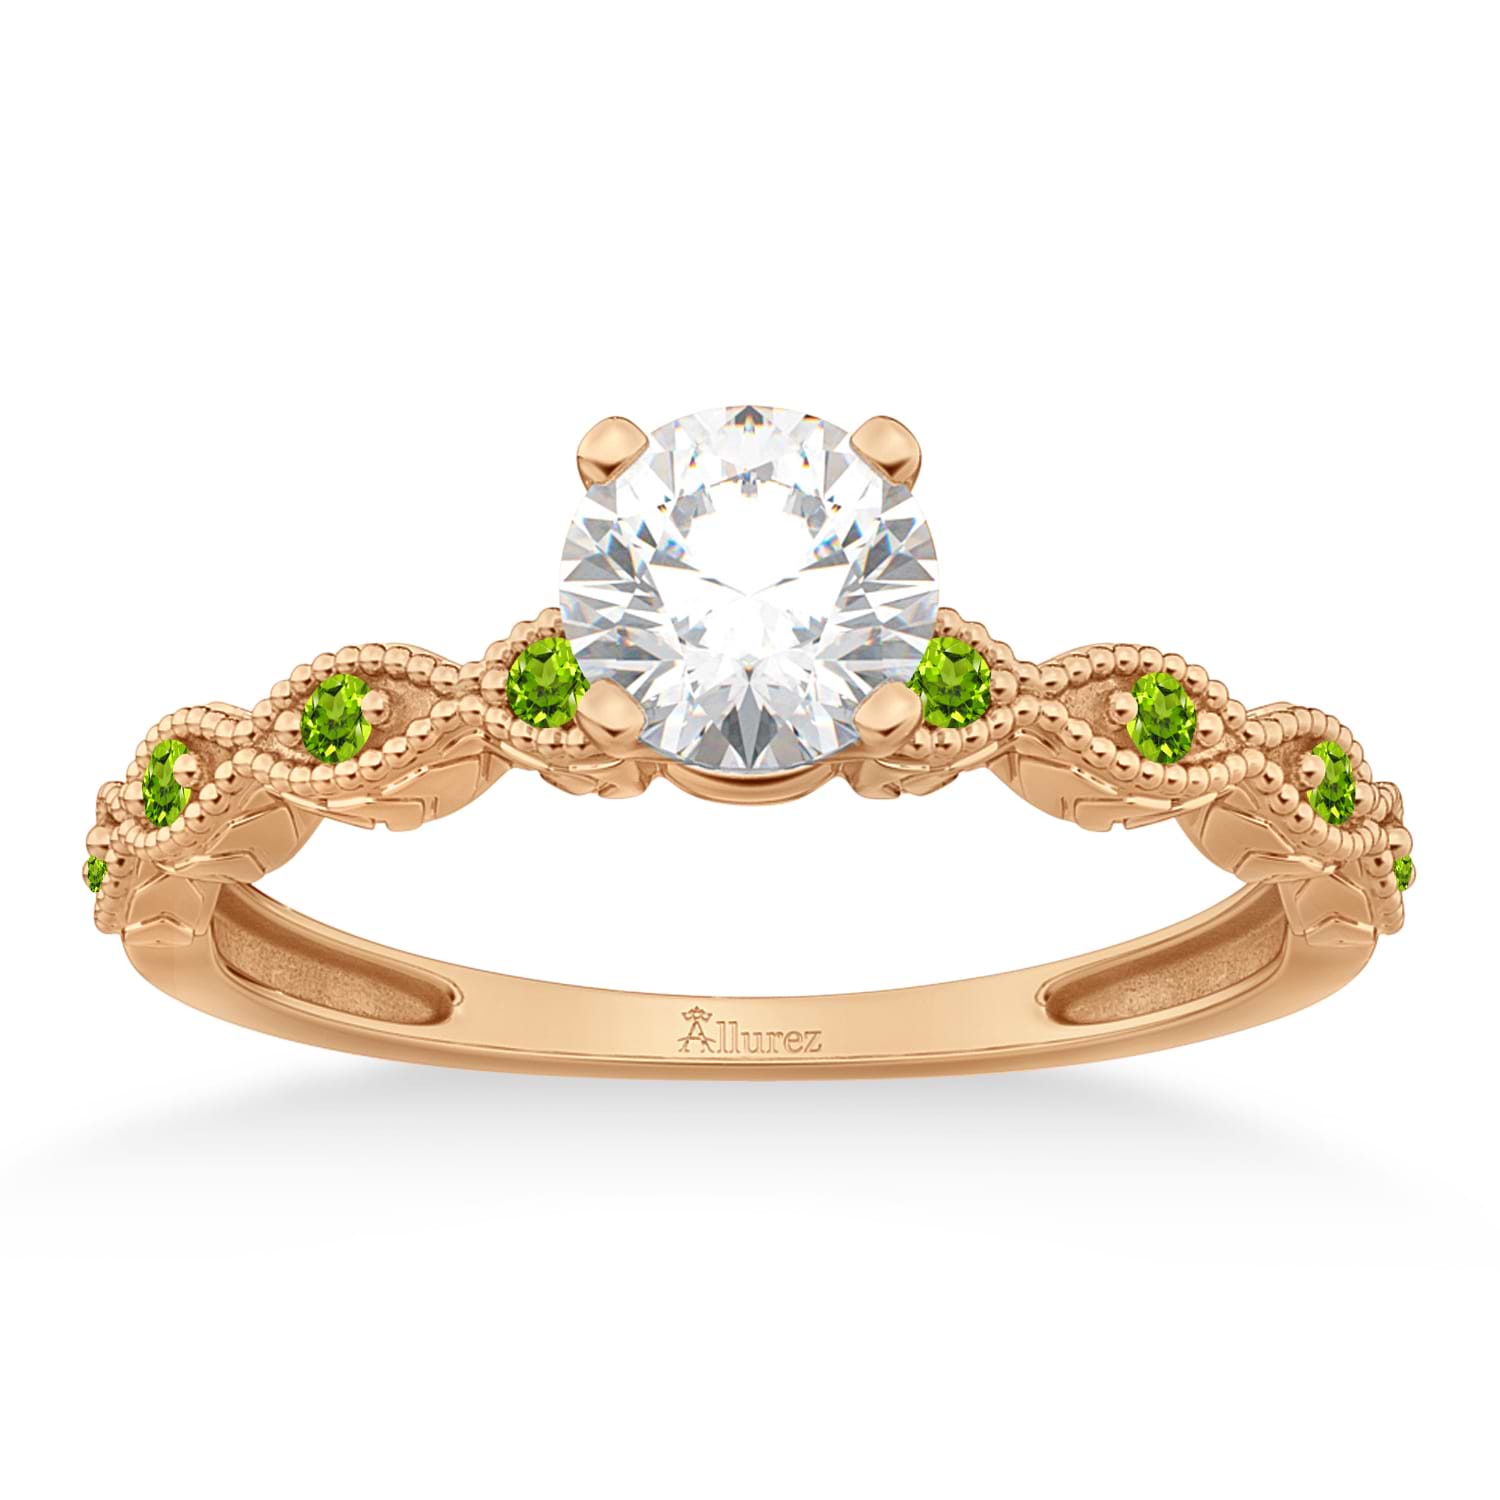 Vintage Marquise Peridot Engagement Ring 18k Rose Gold (0.18ct)